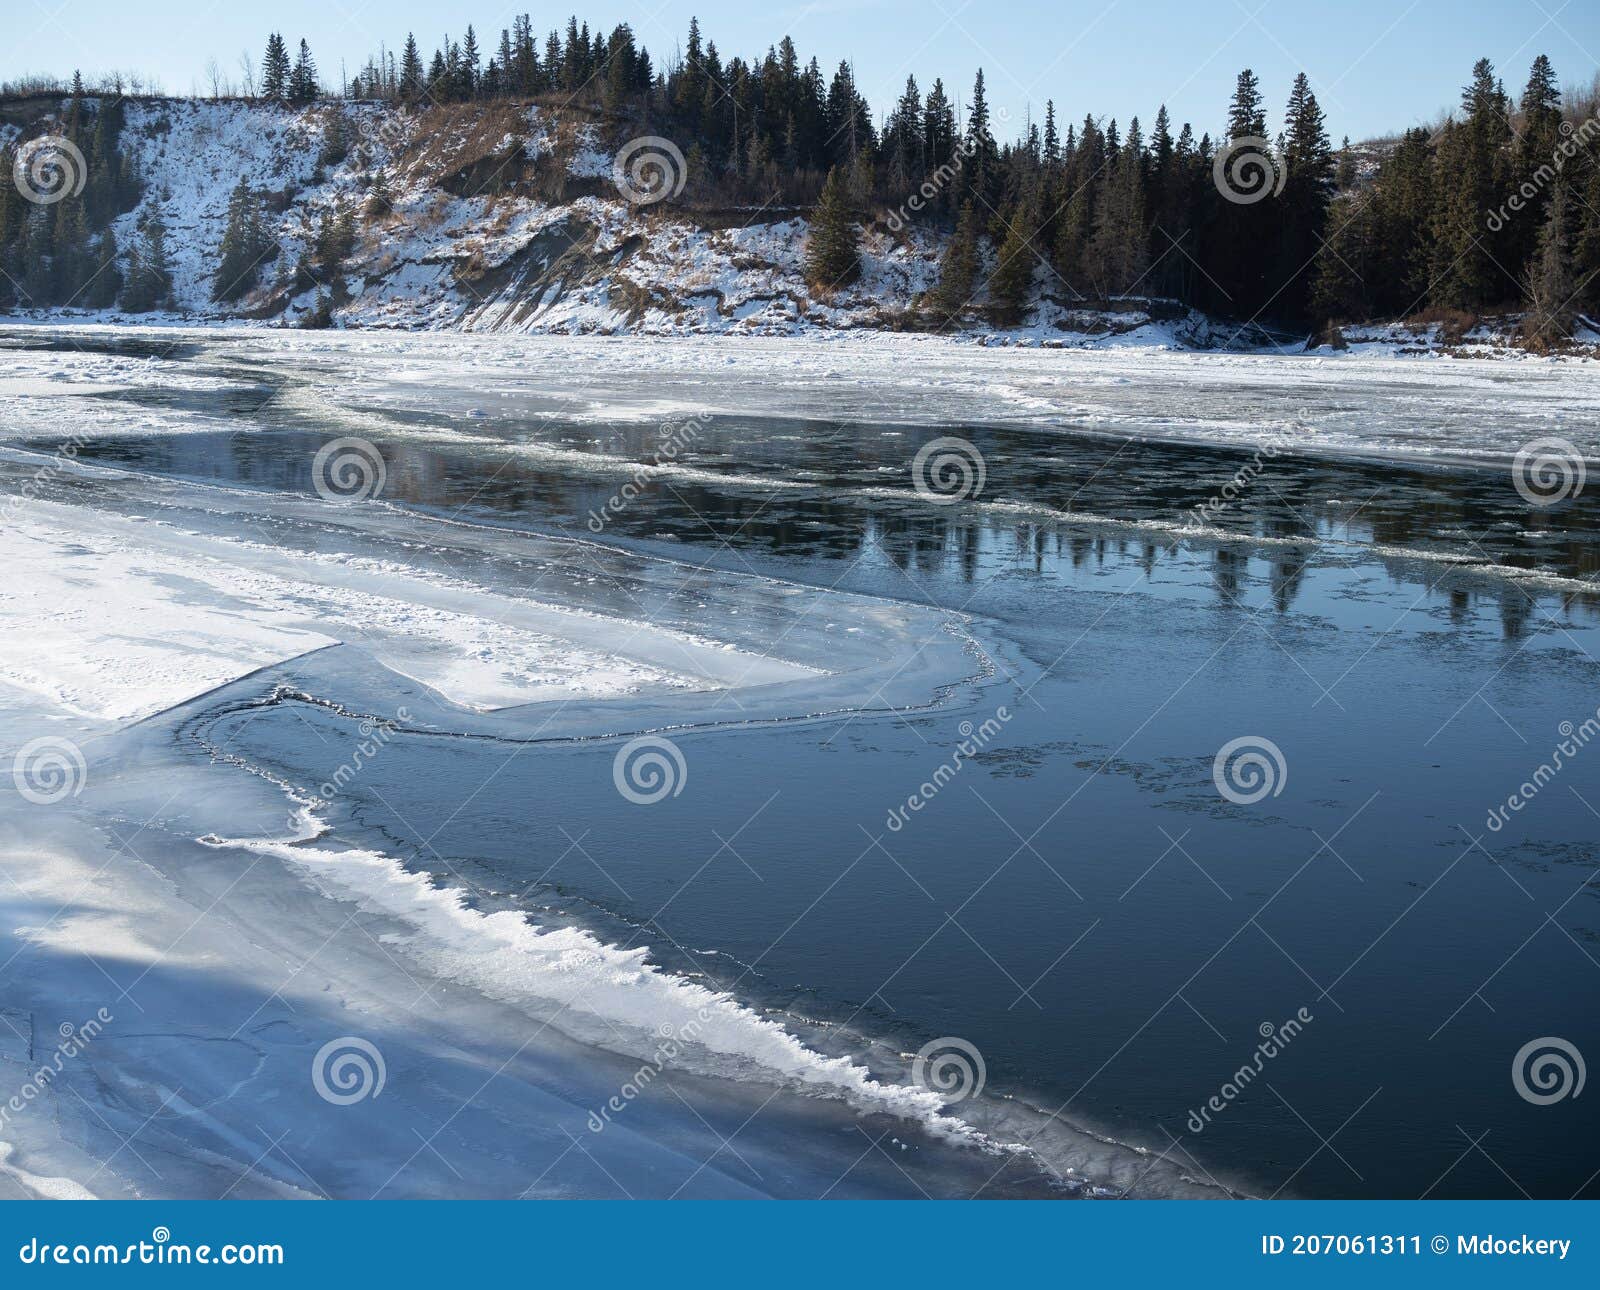 icey river